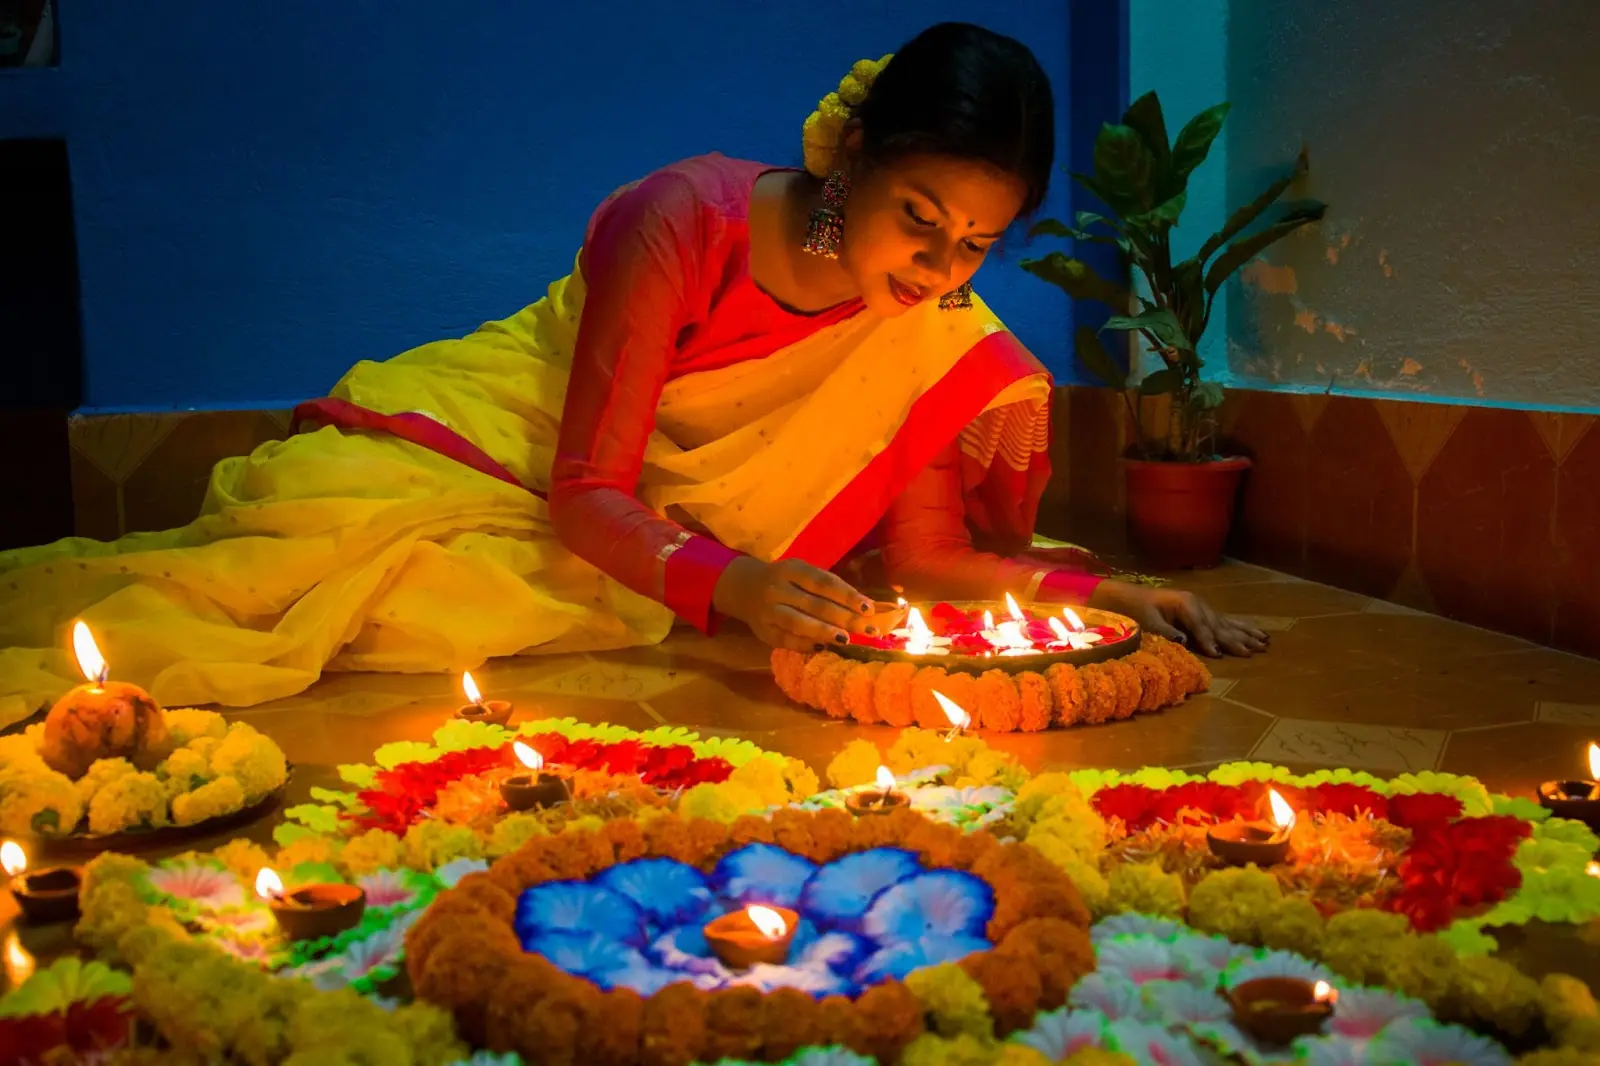 Lady lighting candles for Diwali 